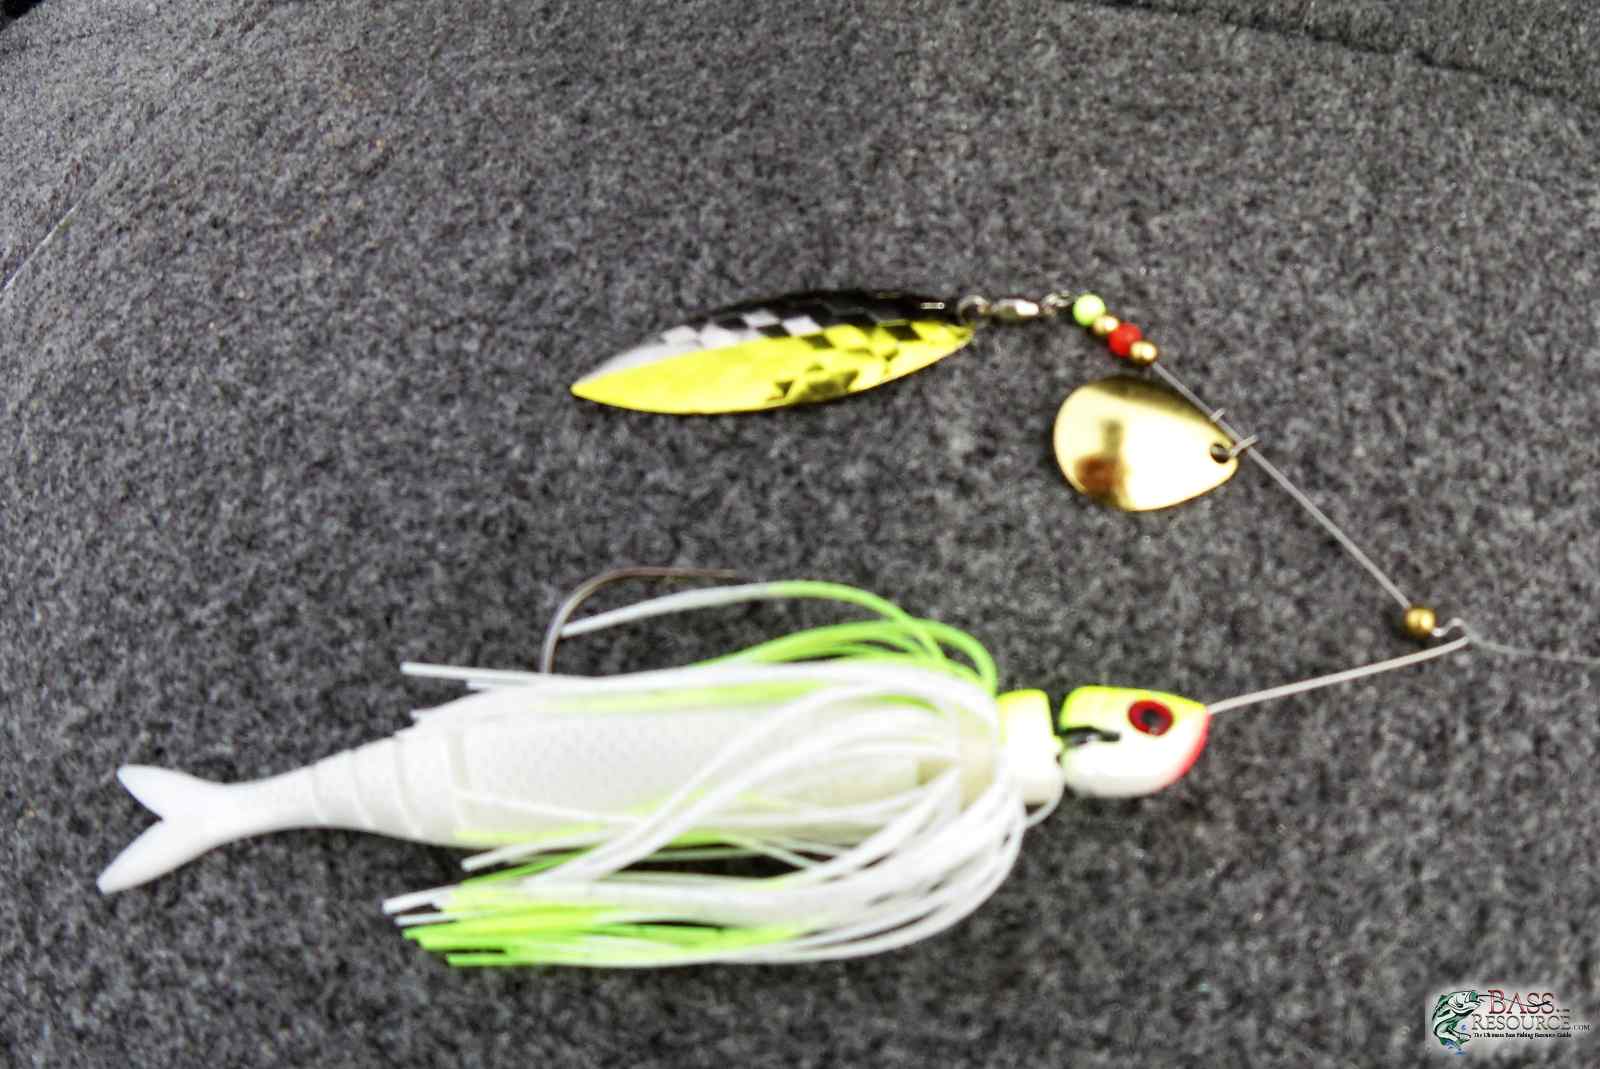 Favorite spinner bait!? - Fishing Tackle - Bass Fishing Forums